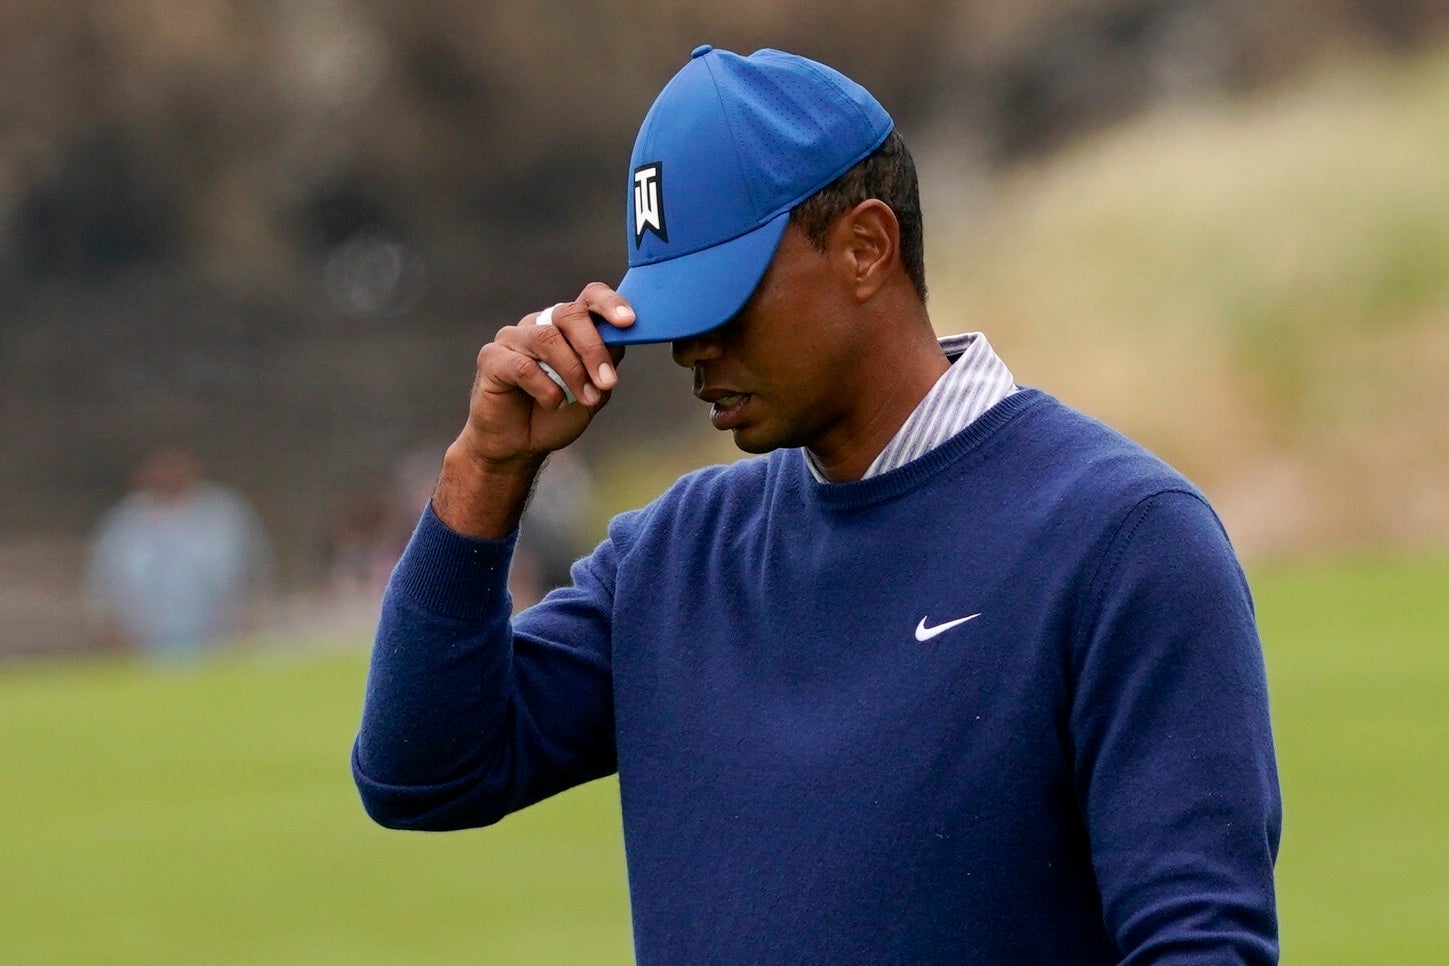 Tiger Woods endured a day to forget